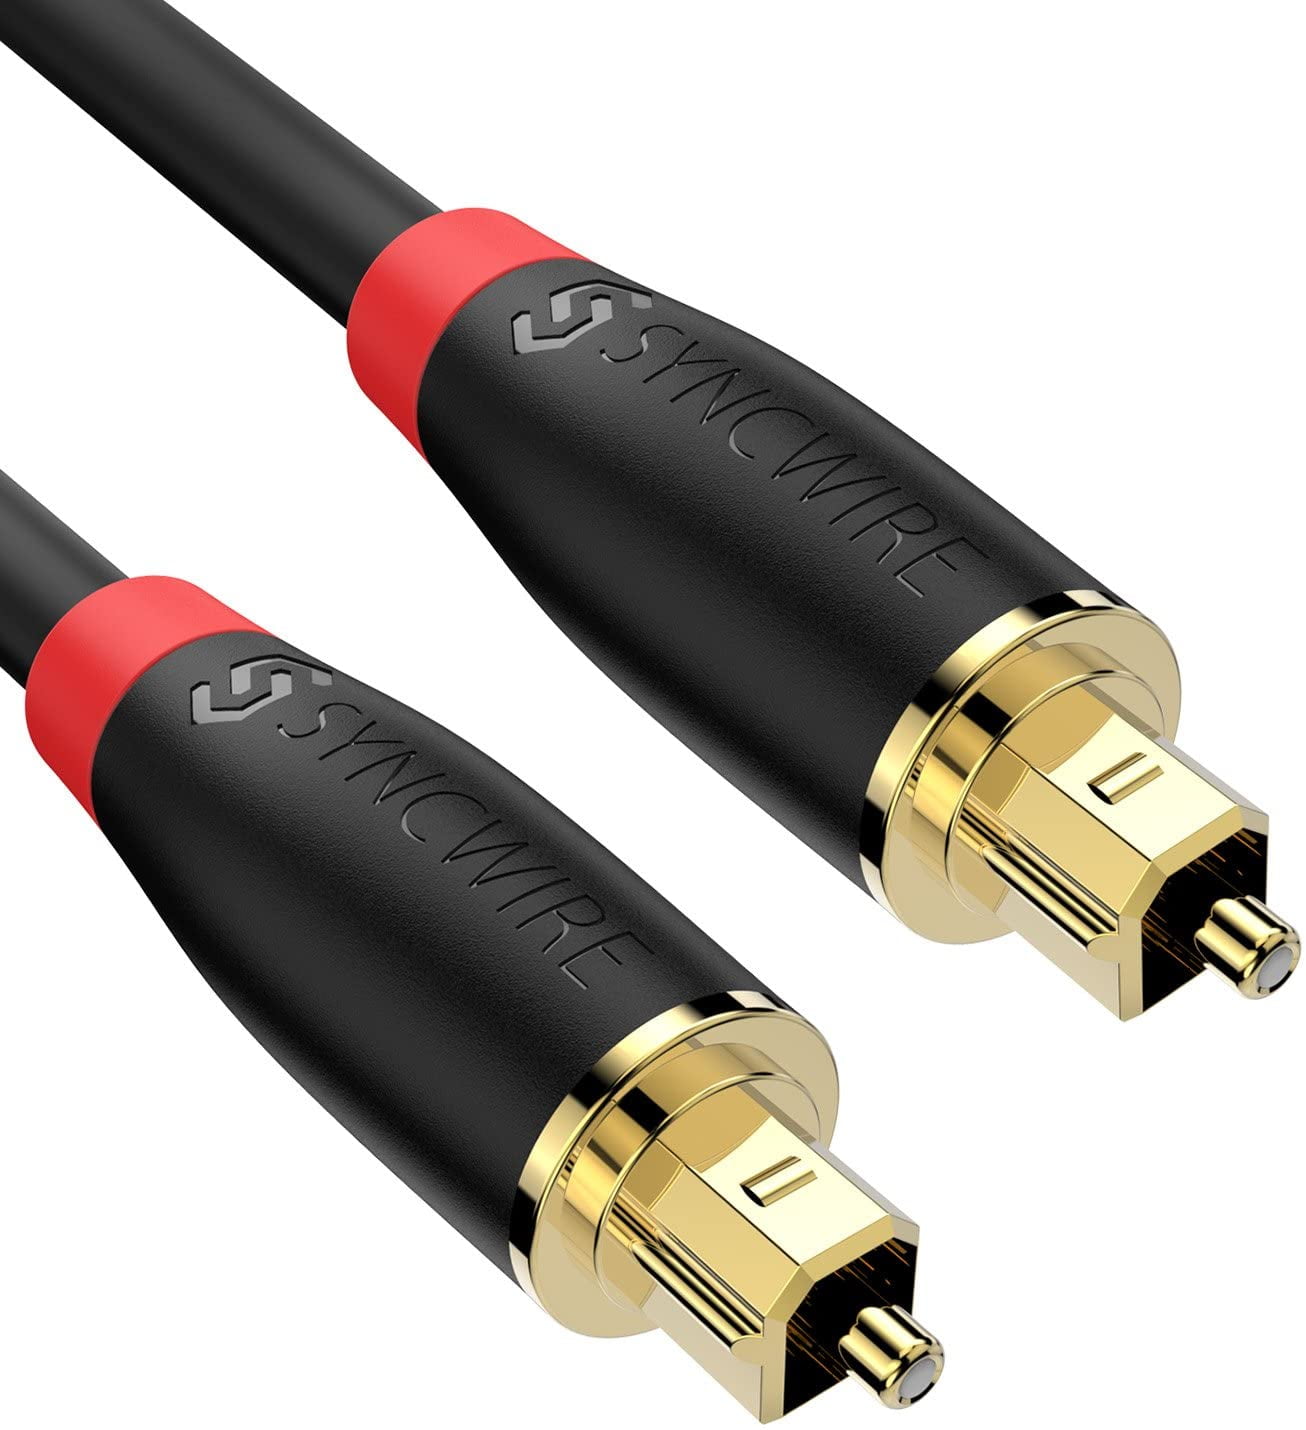 UGREEN Optical Audio Cable Fiber Audio Digital Toslink Cable Braided for Home Theater Sound bar TV PS4 Xbox Blu-Ray Players Playstation and More 6FT